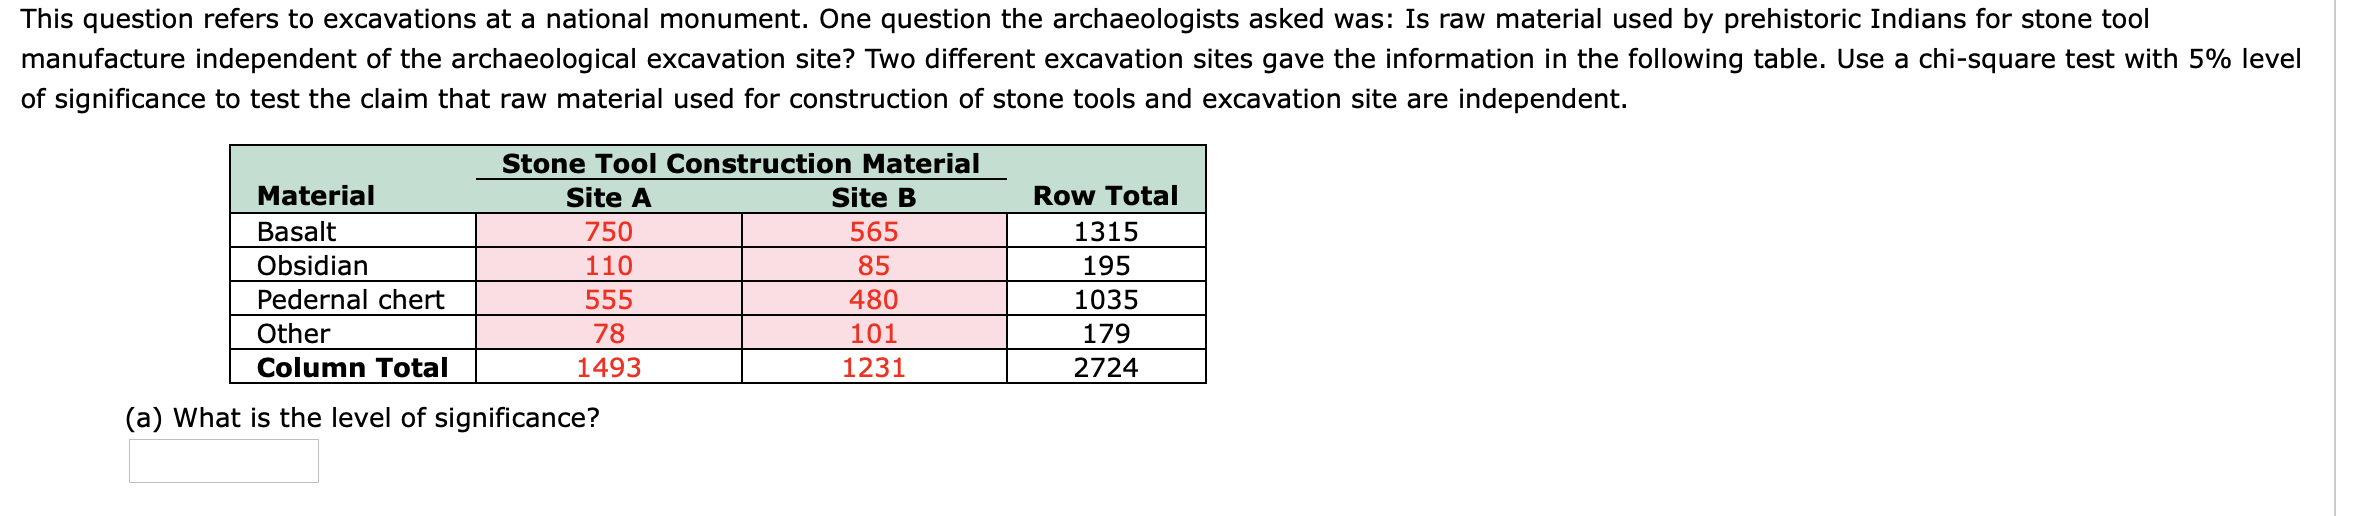 This question refers to excavations at a national monument. One question the archaeologists asked was: Is raw material used by prehistoric Indians for stone tool
manufacture independent of the archaeological excavation site? Two different excavation sites gave the information in the following table. Use a chi-square test with 5% level
of significance to test the claim that raw material used for construction of stone tools and excavation site are independent.
Stone Tool Construction Material
Site A
Material
Site B
Row Total
Basalt
750
110
565
1315
Pedernal chert
Obsidian
555
78
1493
480
101
1231
1035
179
2724
Column Total
Other
(a) What is the level of significance?
